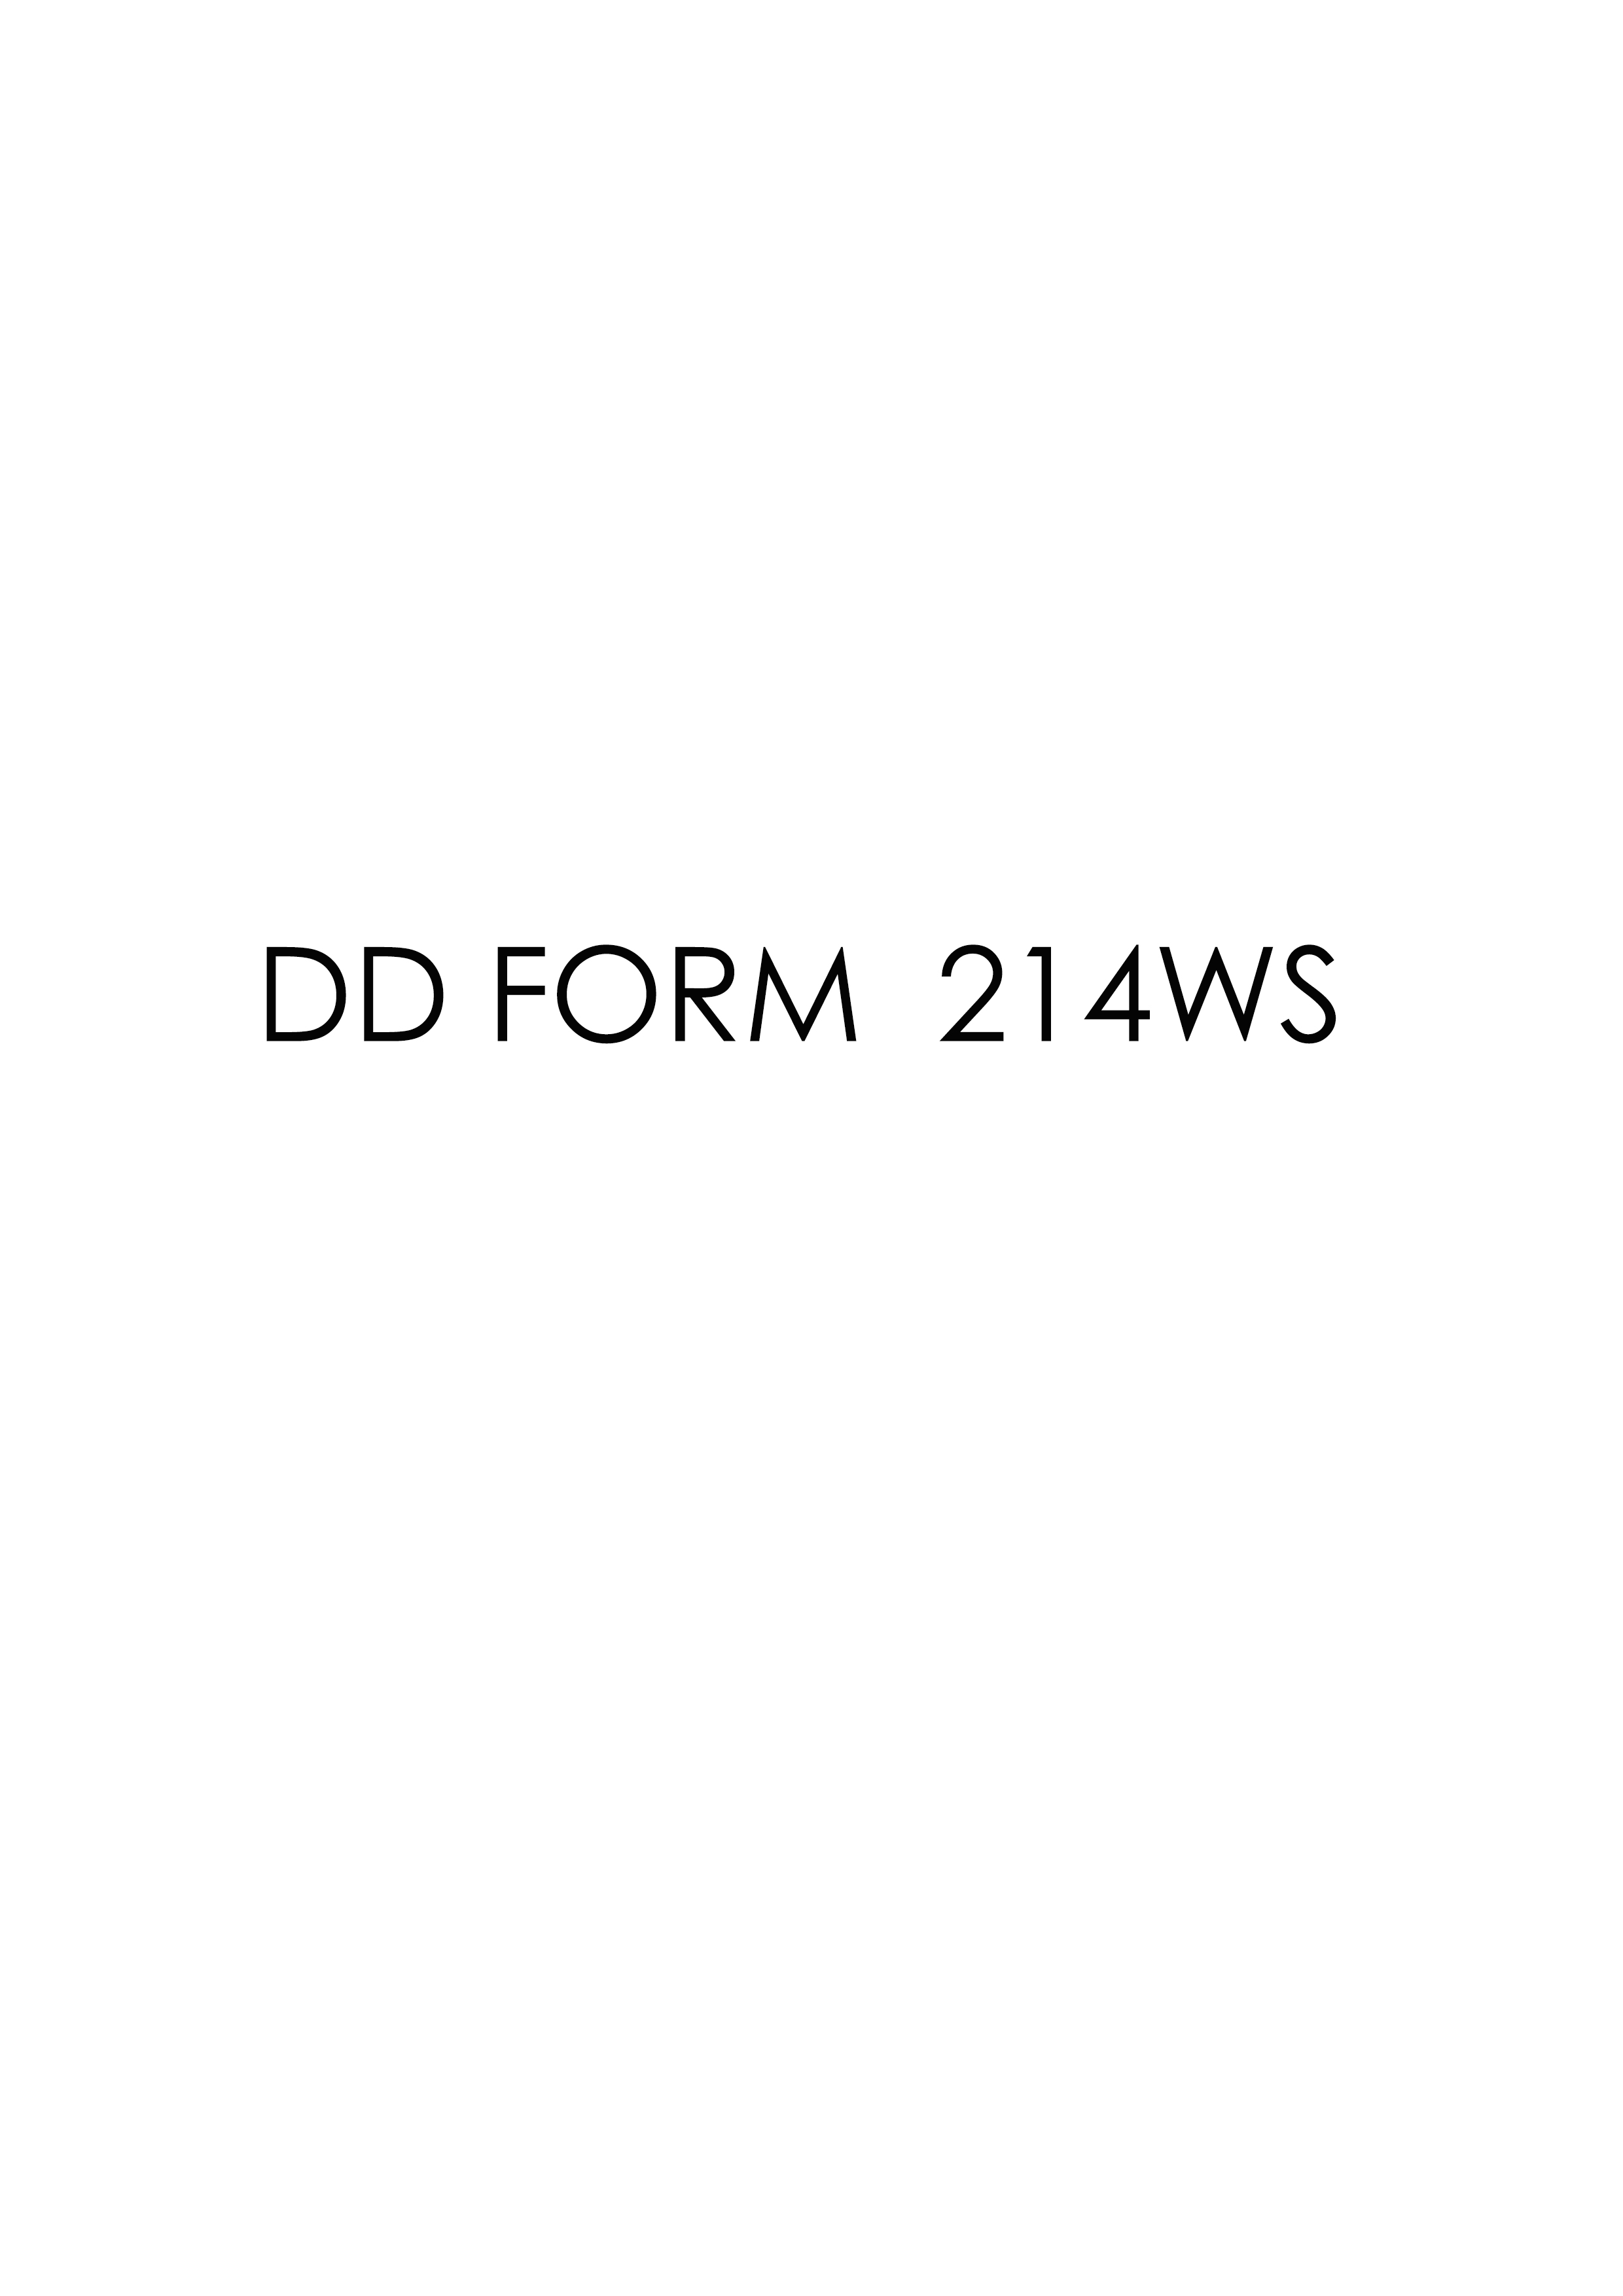 Download Fillable dd Form 214WS